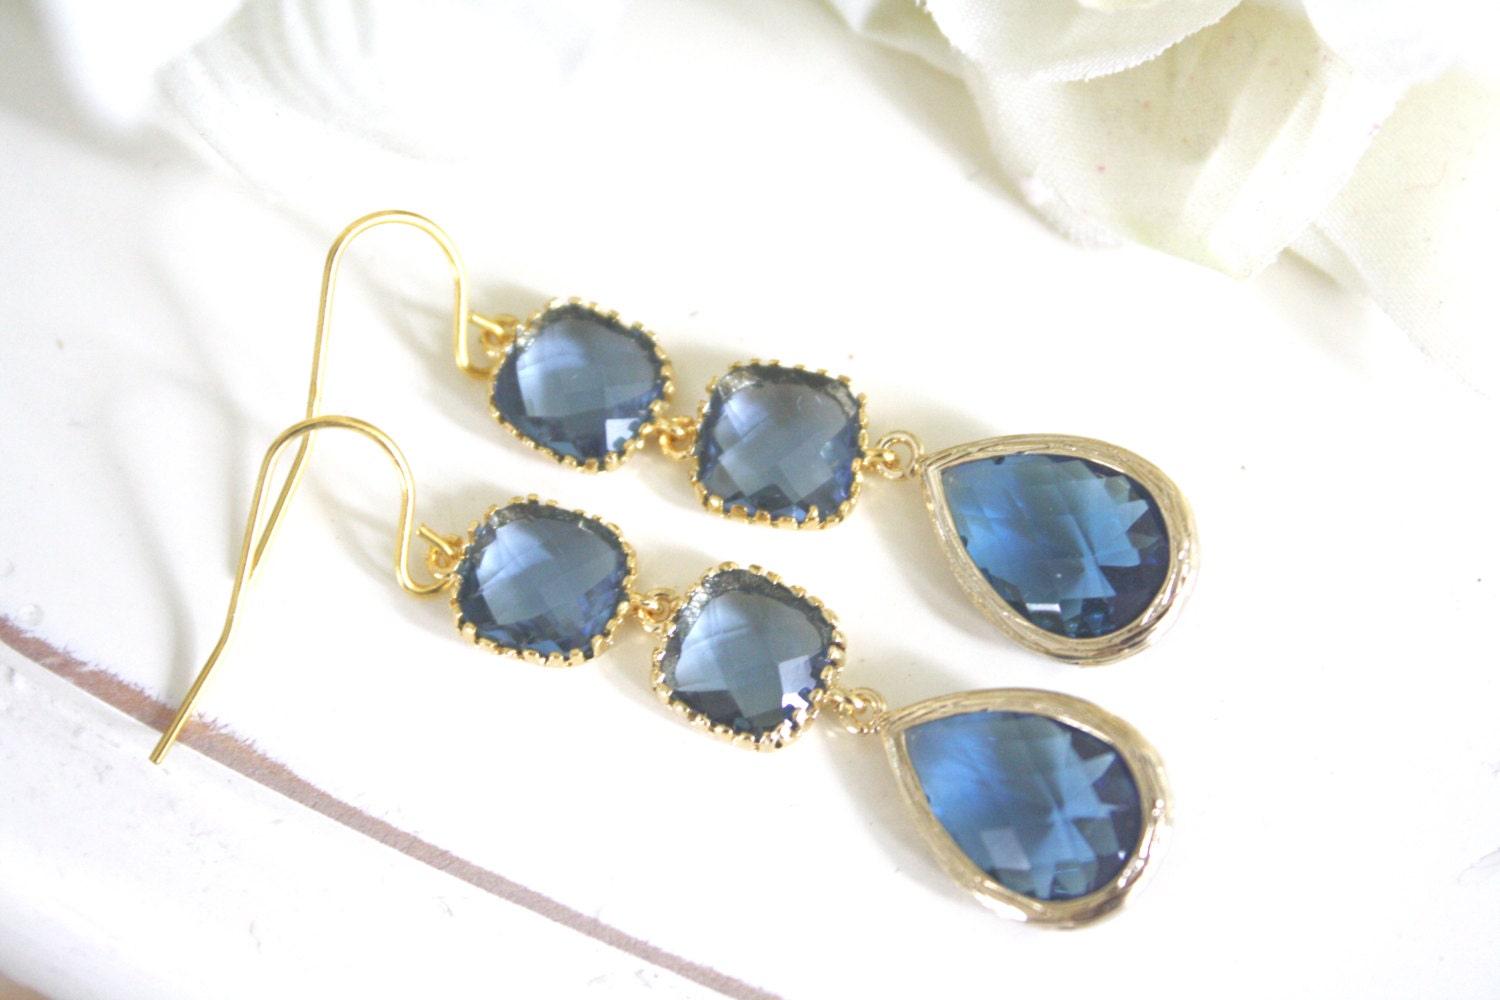 Gold Earrings, Blue Earrings, Sapphire Earrings Dangle, Bridesmaids Jewelry, Bridesmaid gifts, Navy Wedding, Gifts for Her Girlfriend Gifts